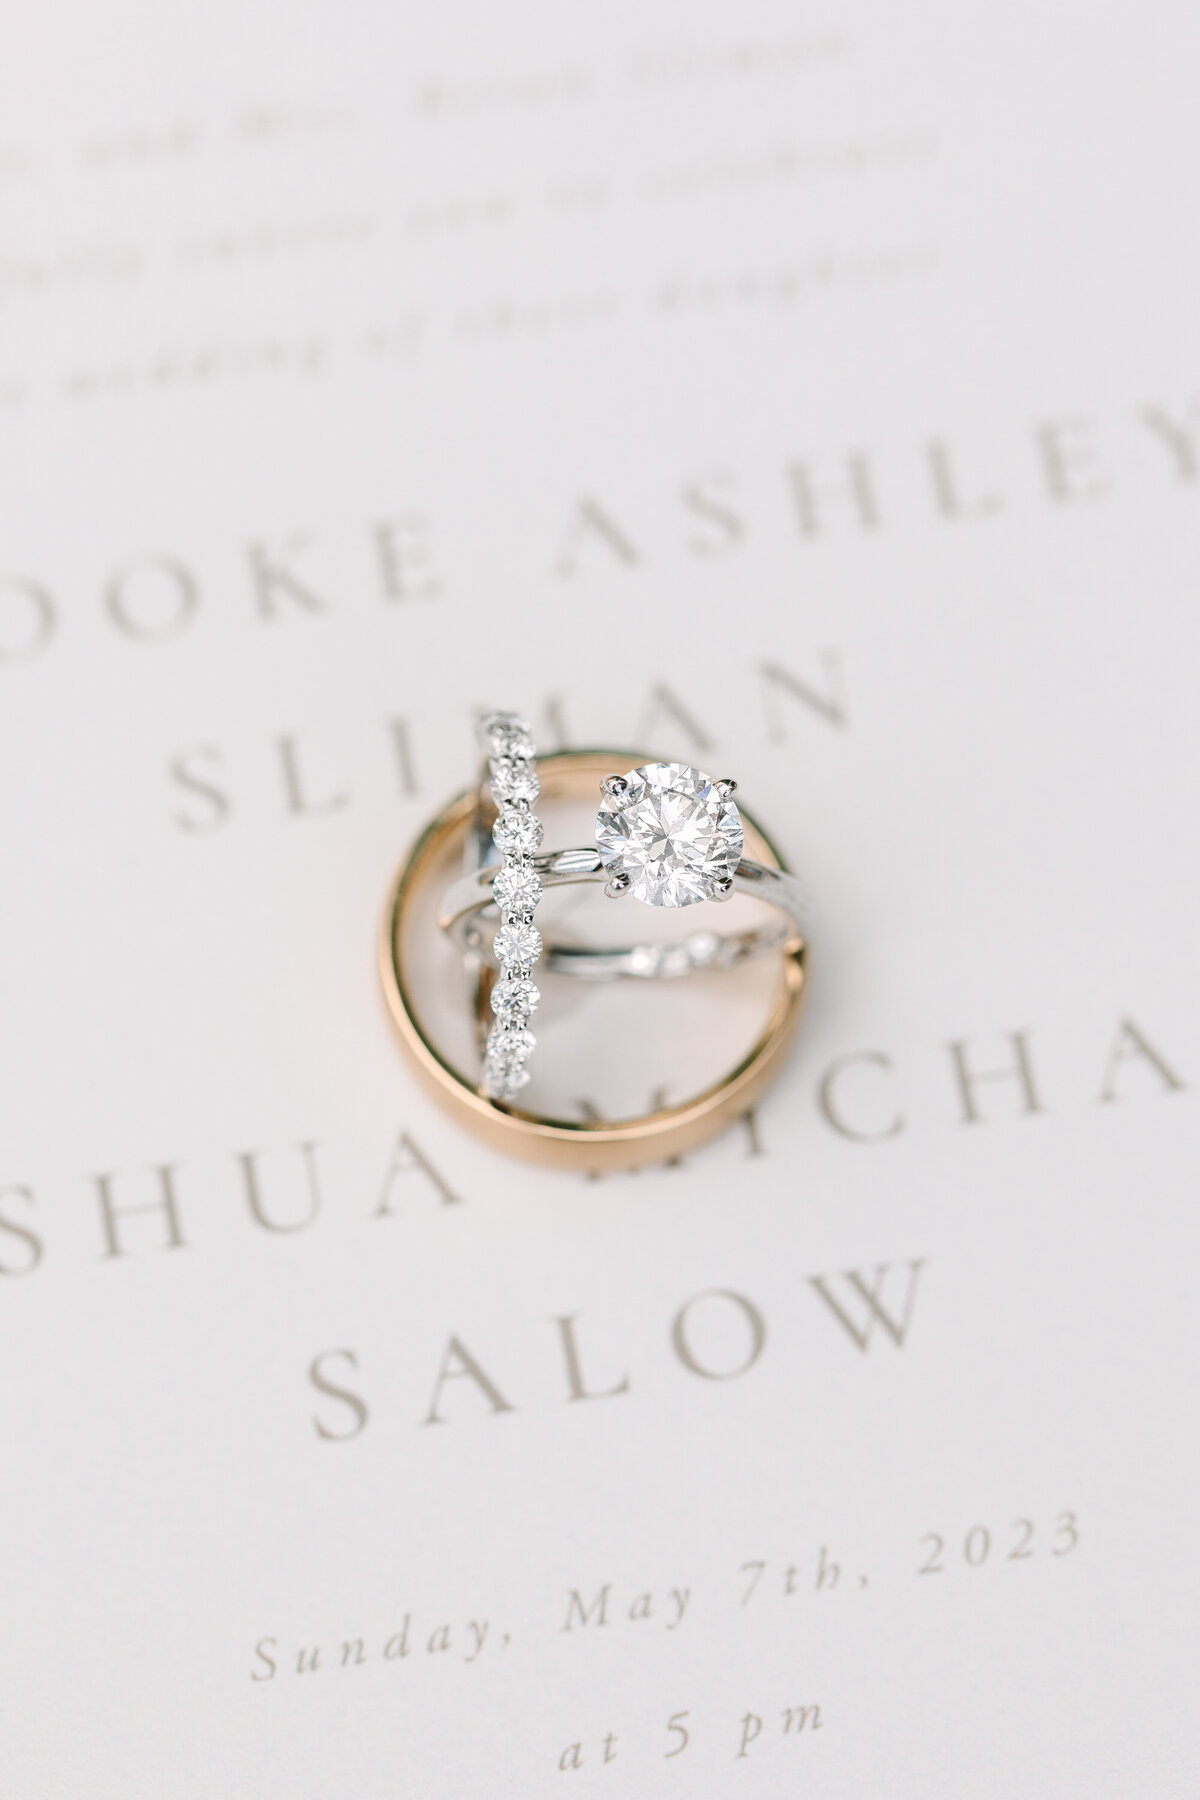 close up image of wedding rings on a wedding invitation.